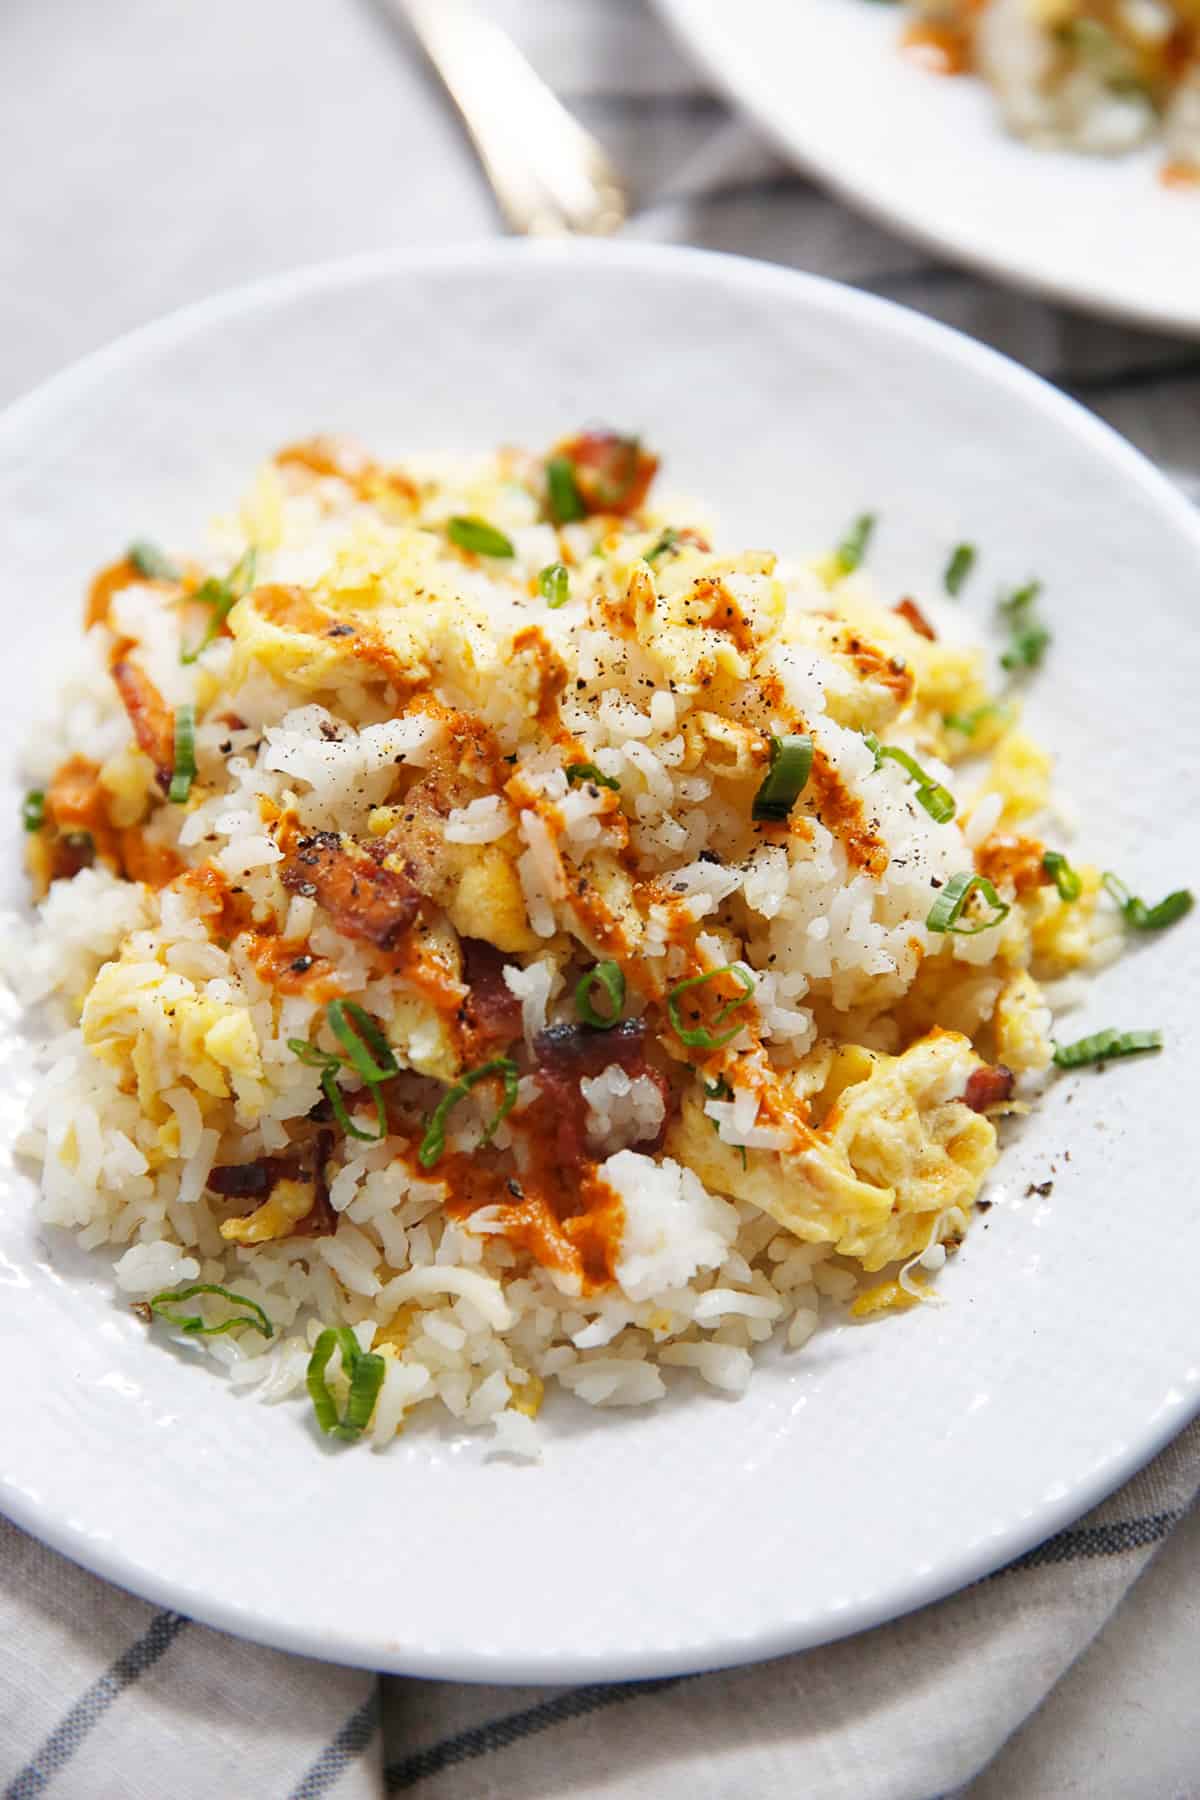 Breakfast Fried Rice (using only 4 ingredients!) - Lexi's Clean Kitchen